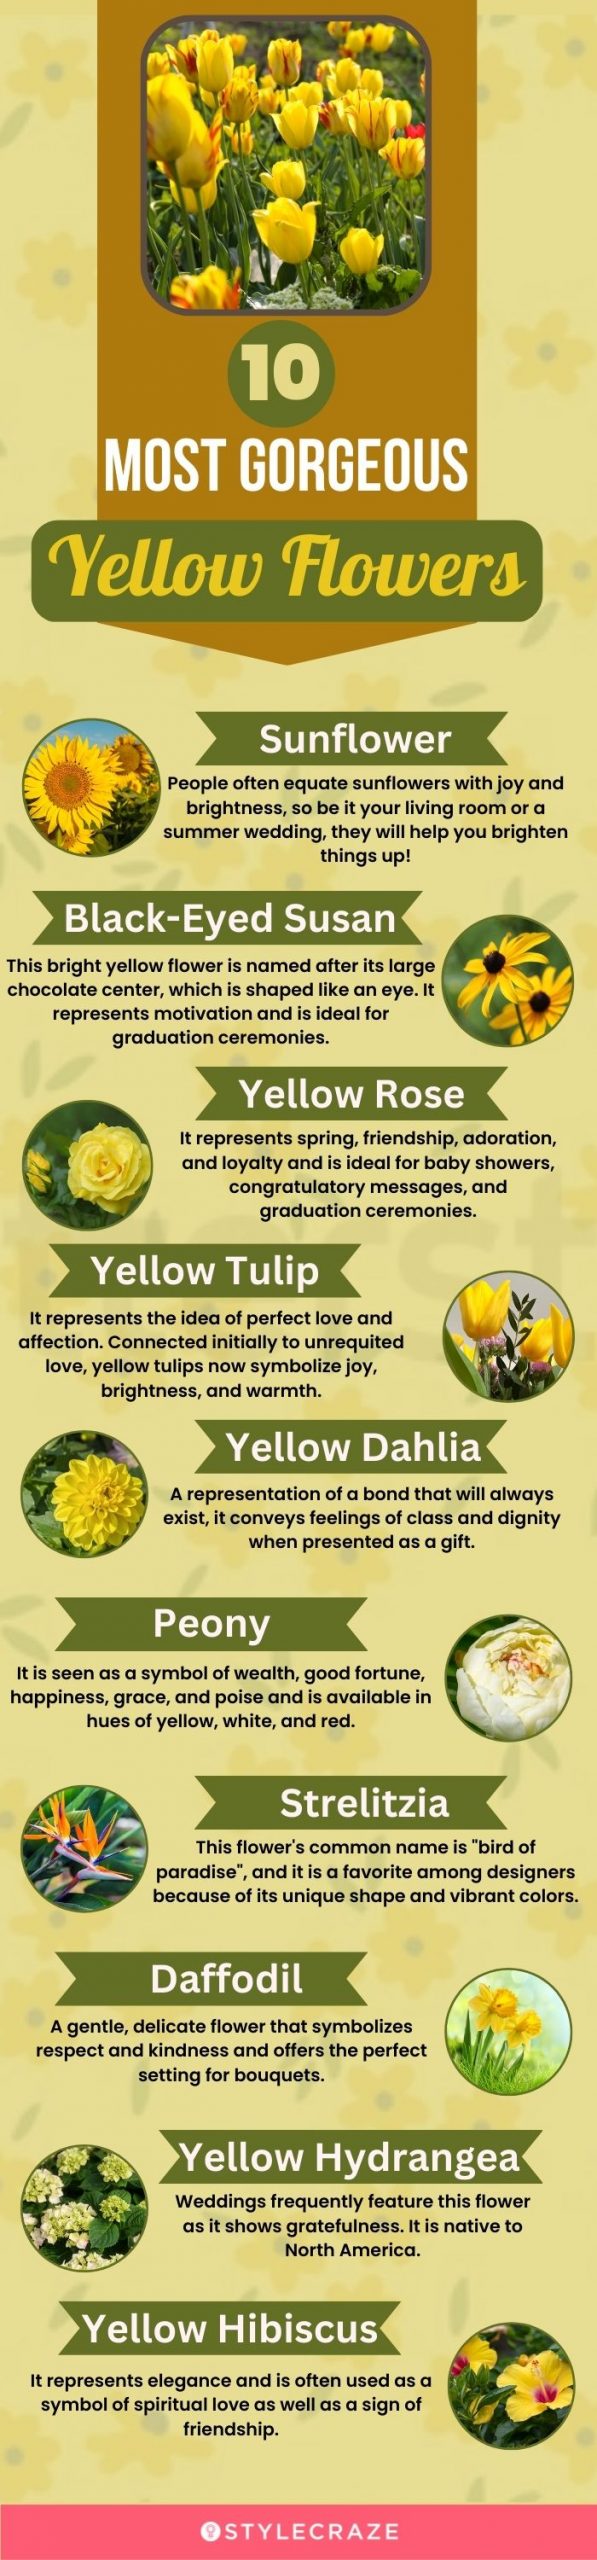 10 most gorgeous yellow flowers [infographic]